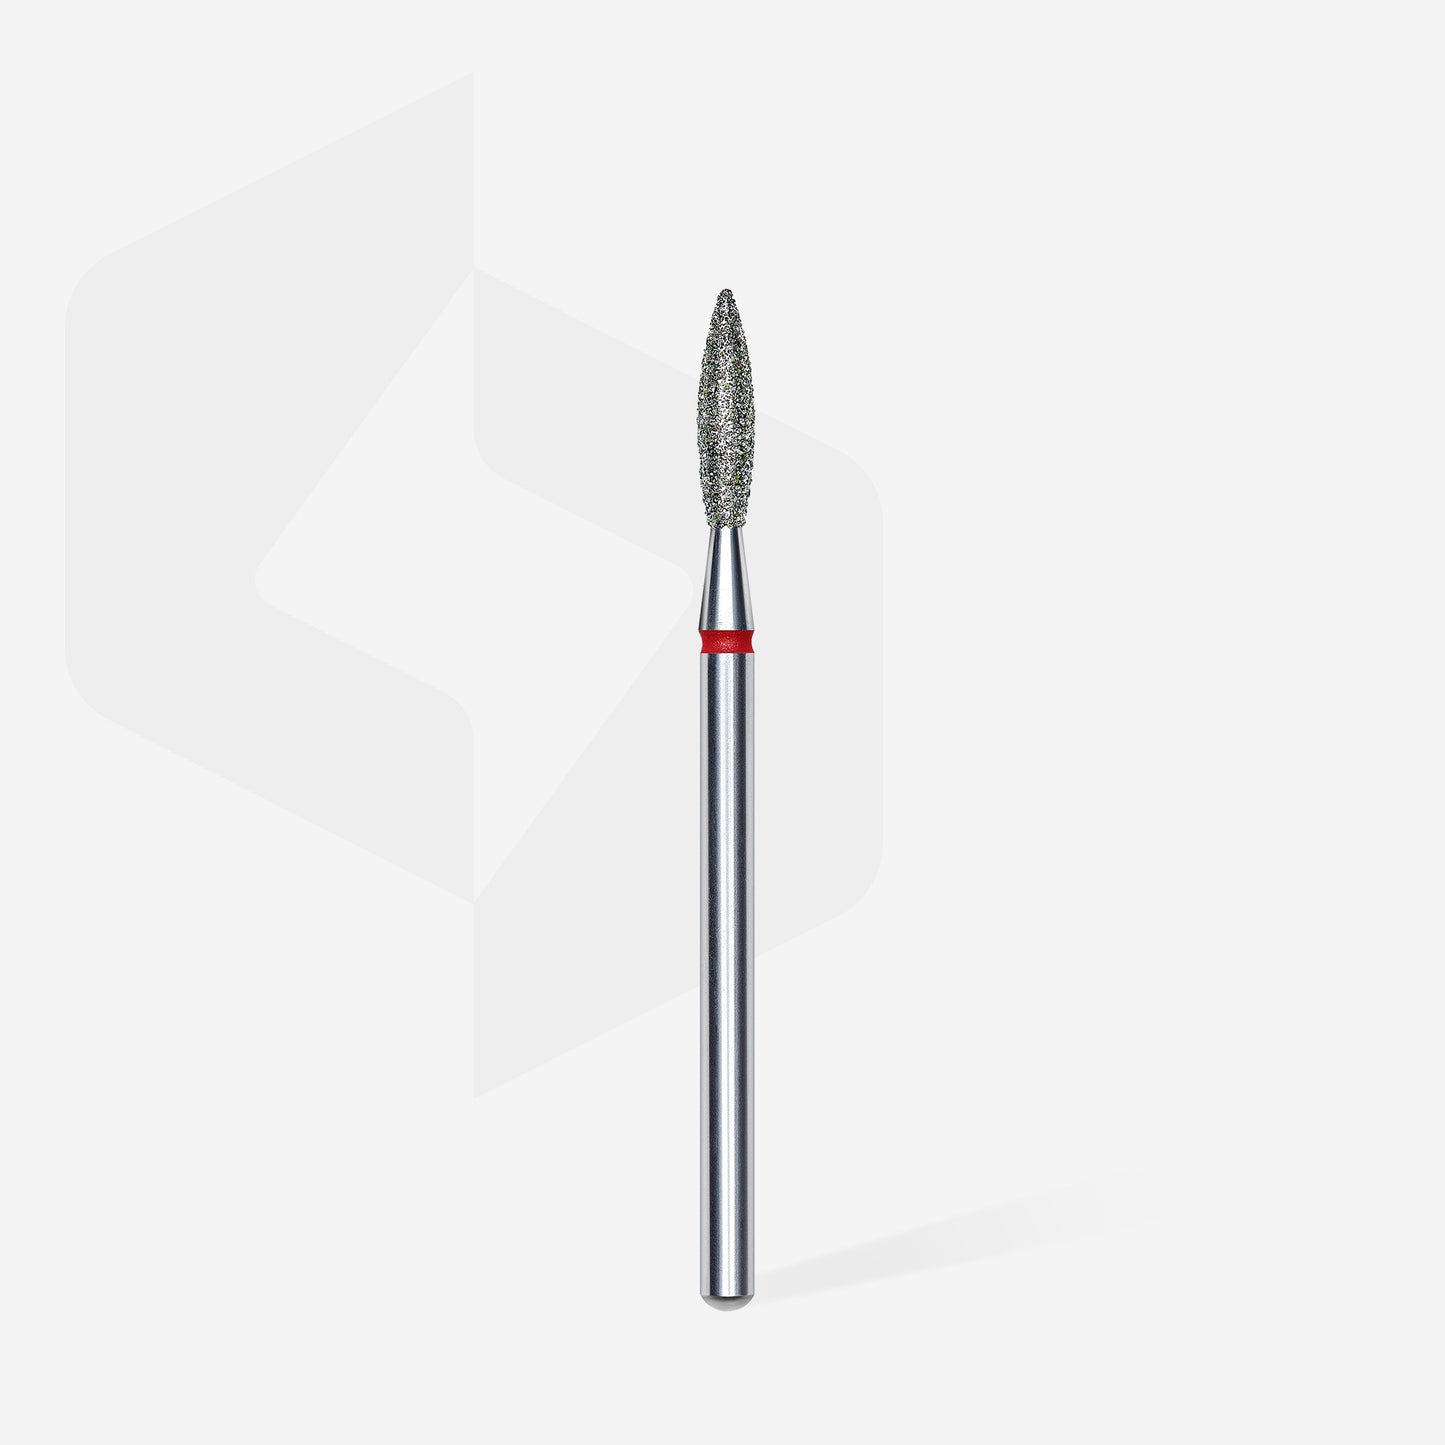 STALEKS Diamond Nail Drill Bit Flame Red 2.1mm 8mm Pointed